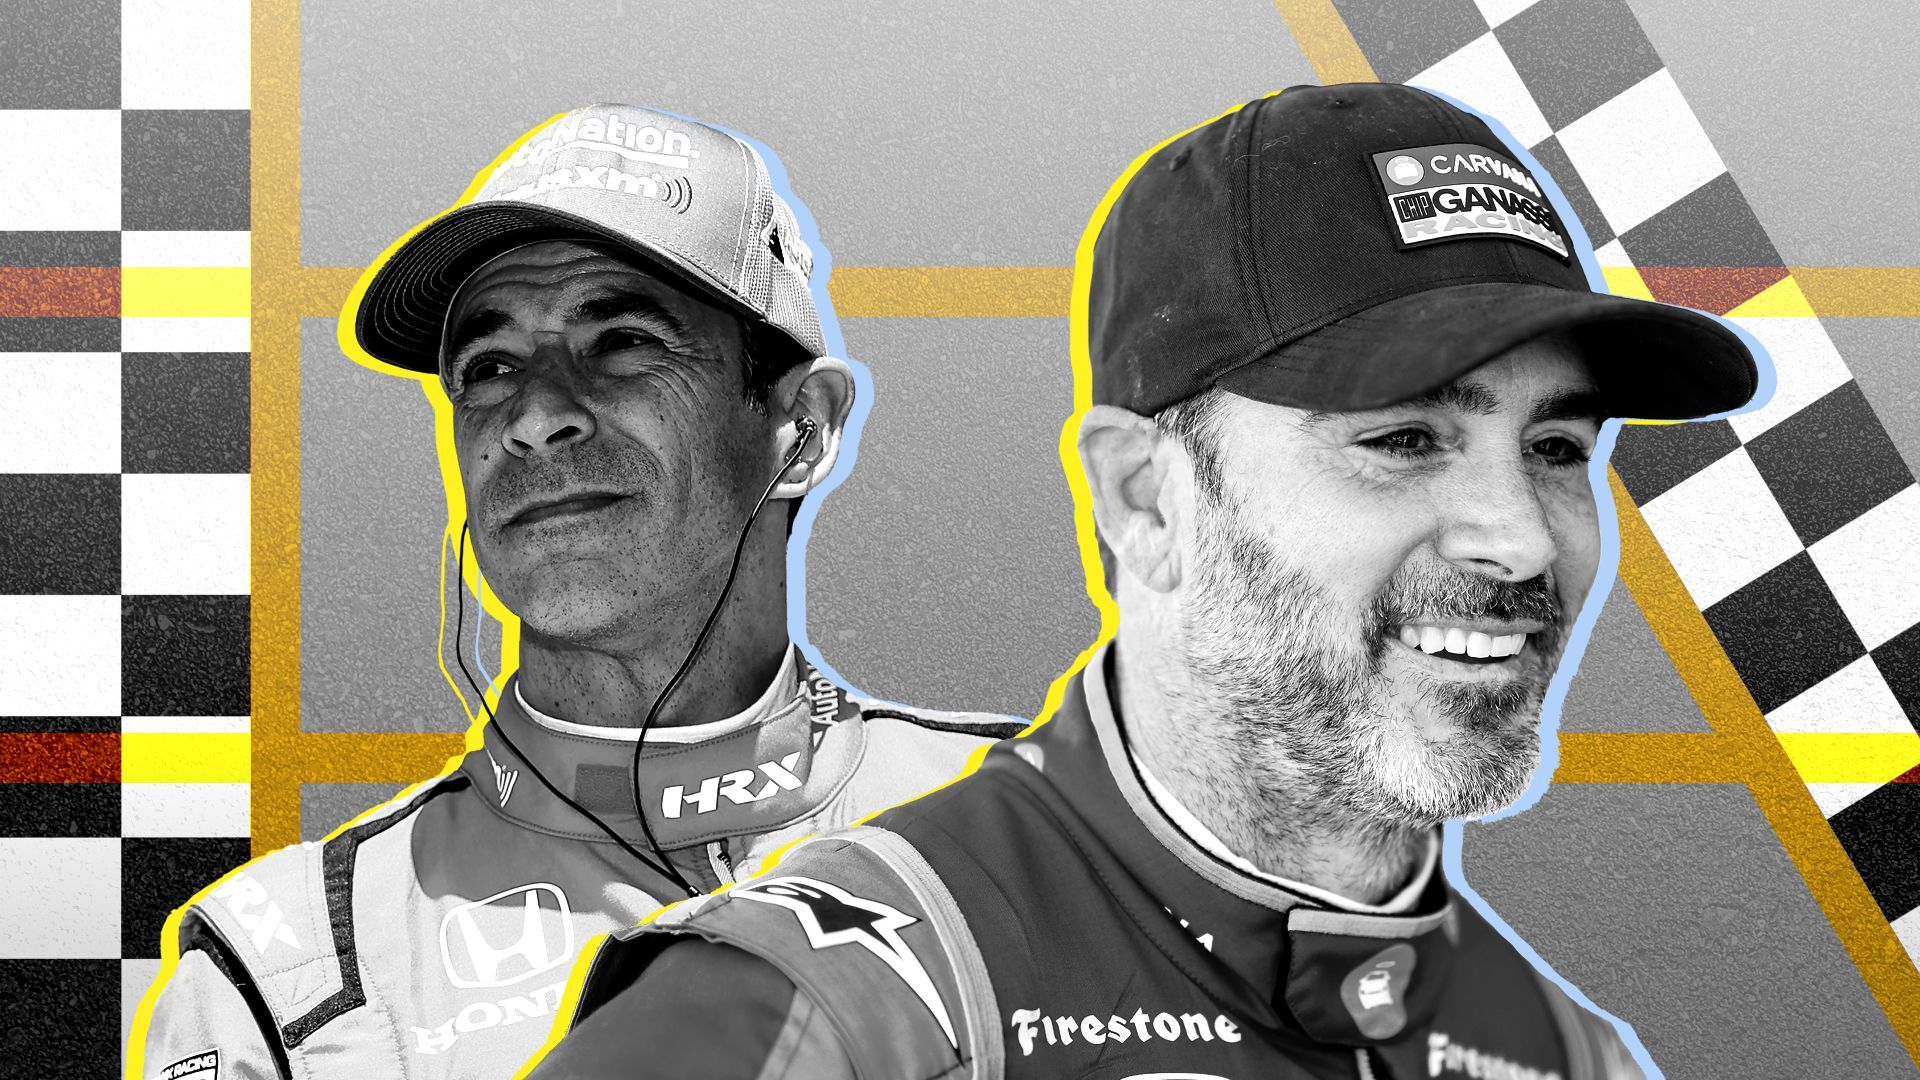 Photo illustration of Jimmie Johnson and Helio Castroneves with pavement and racing symbols in the background